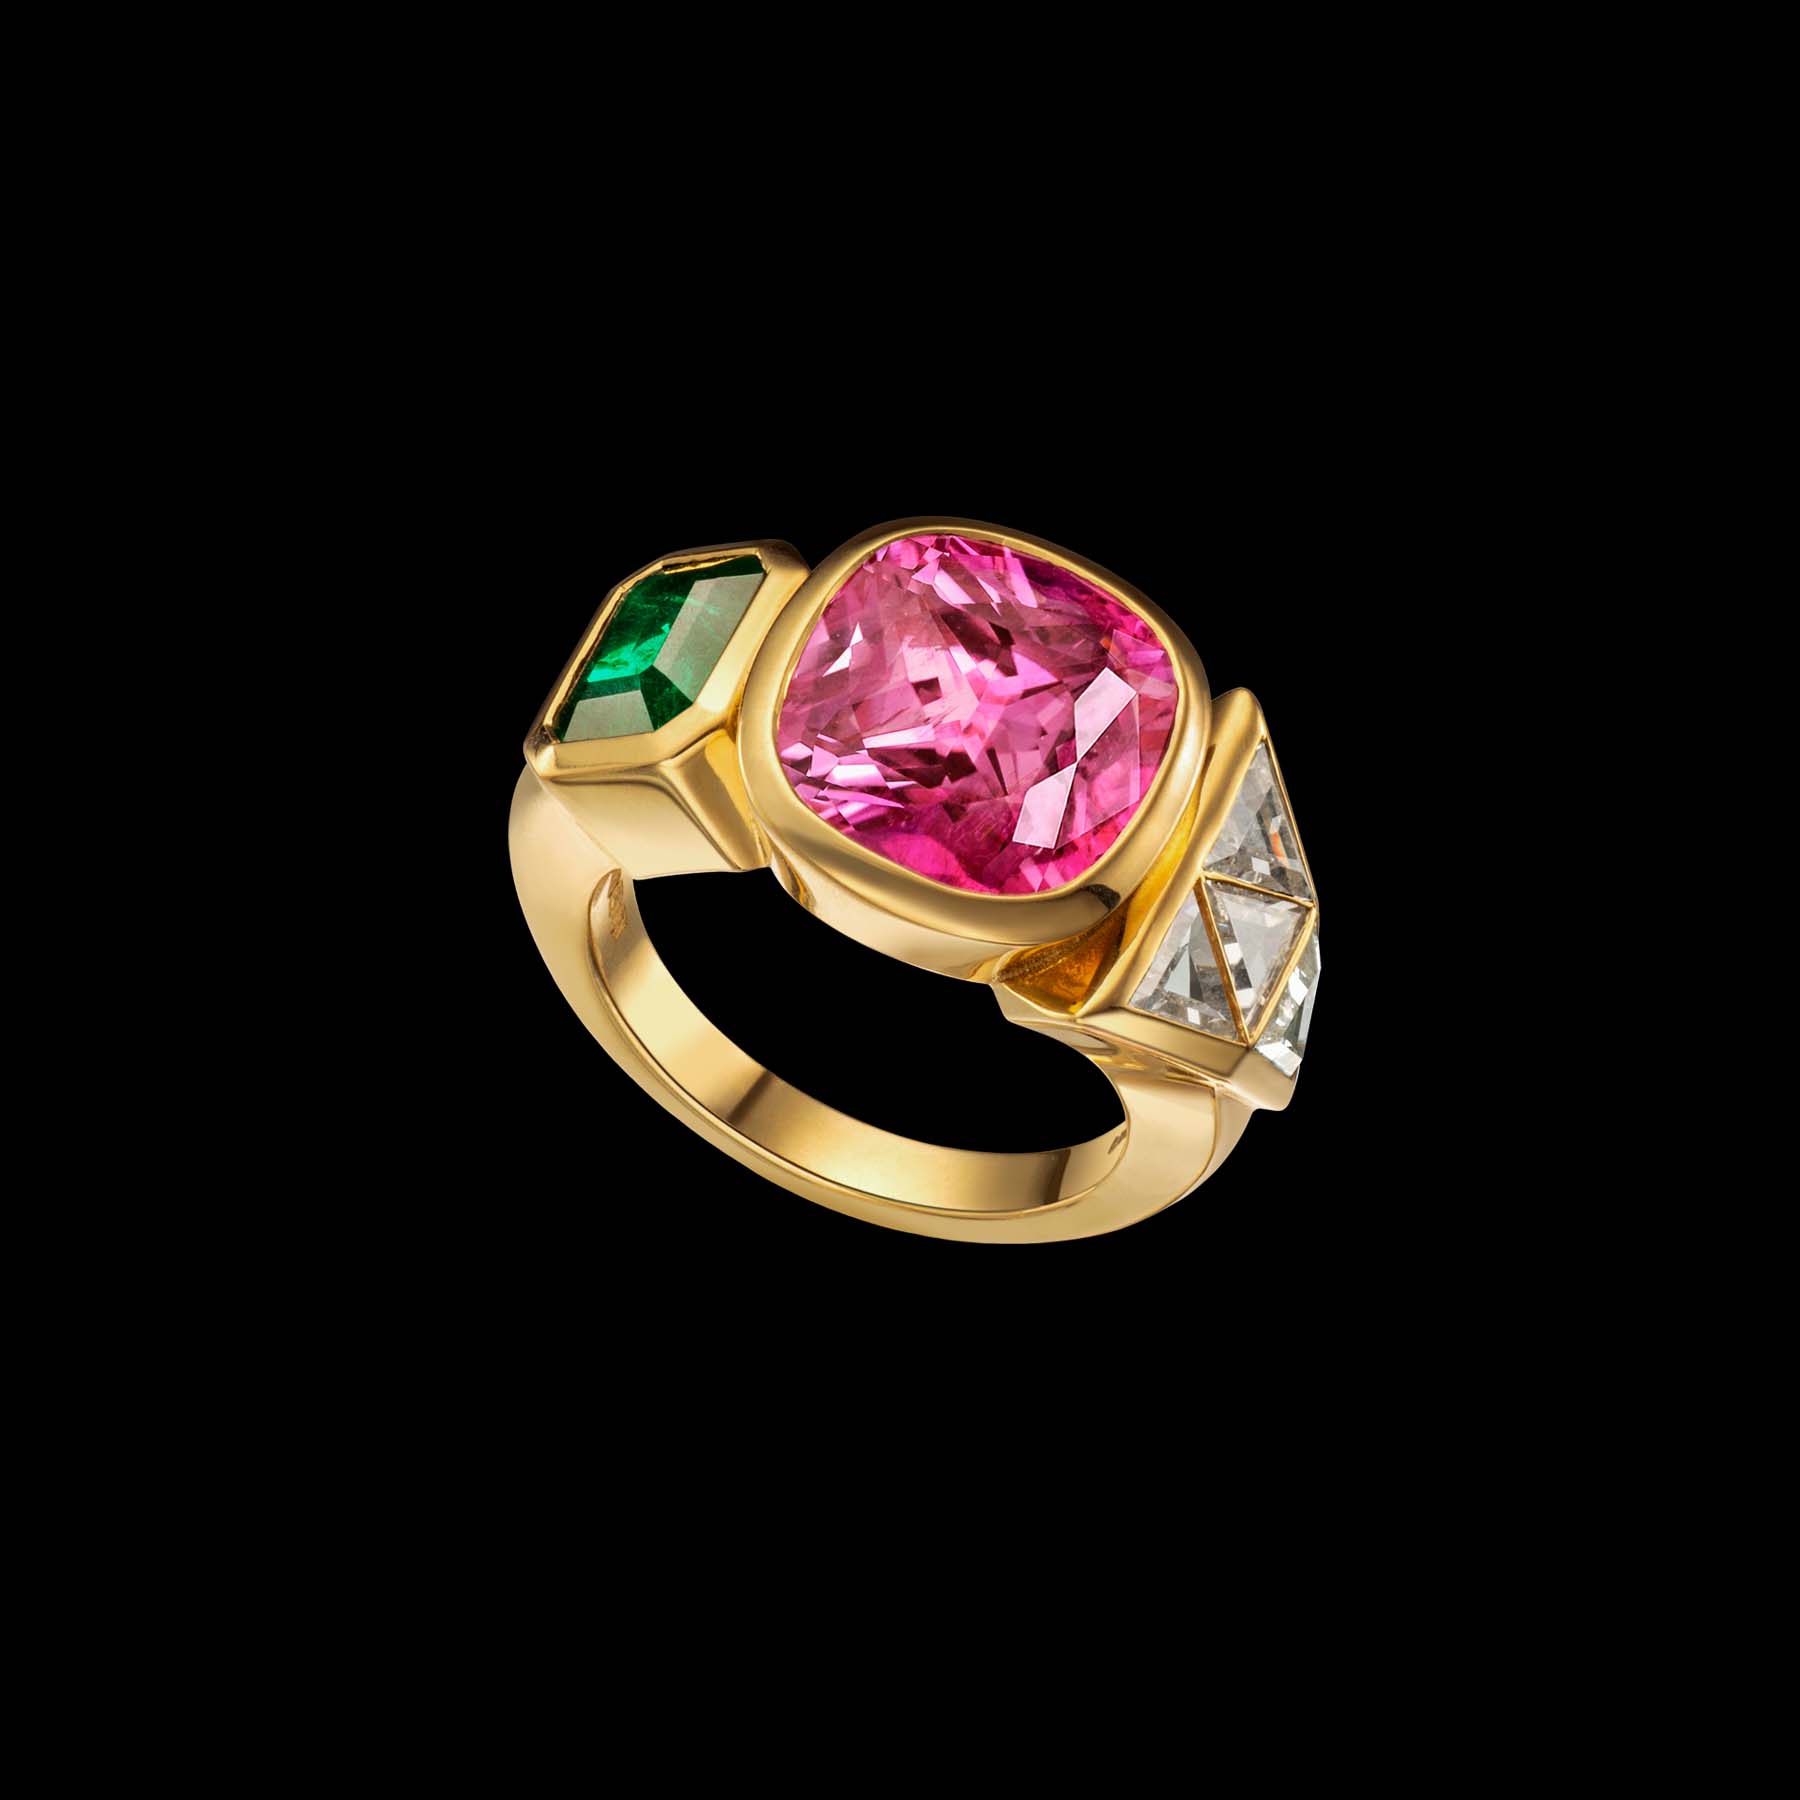 Edible ring by designer Solange Azagury-Partridge - 18k Yellow Gold, Pink Sapphire - front diagonal view